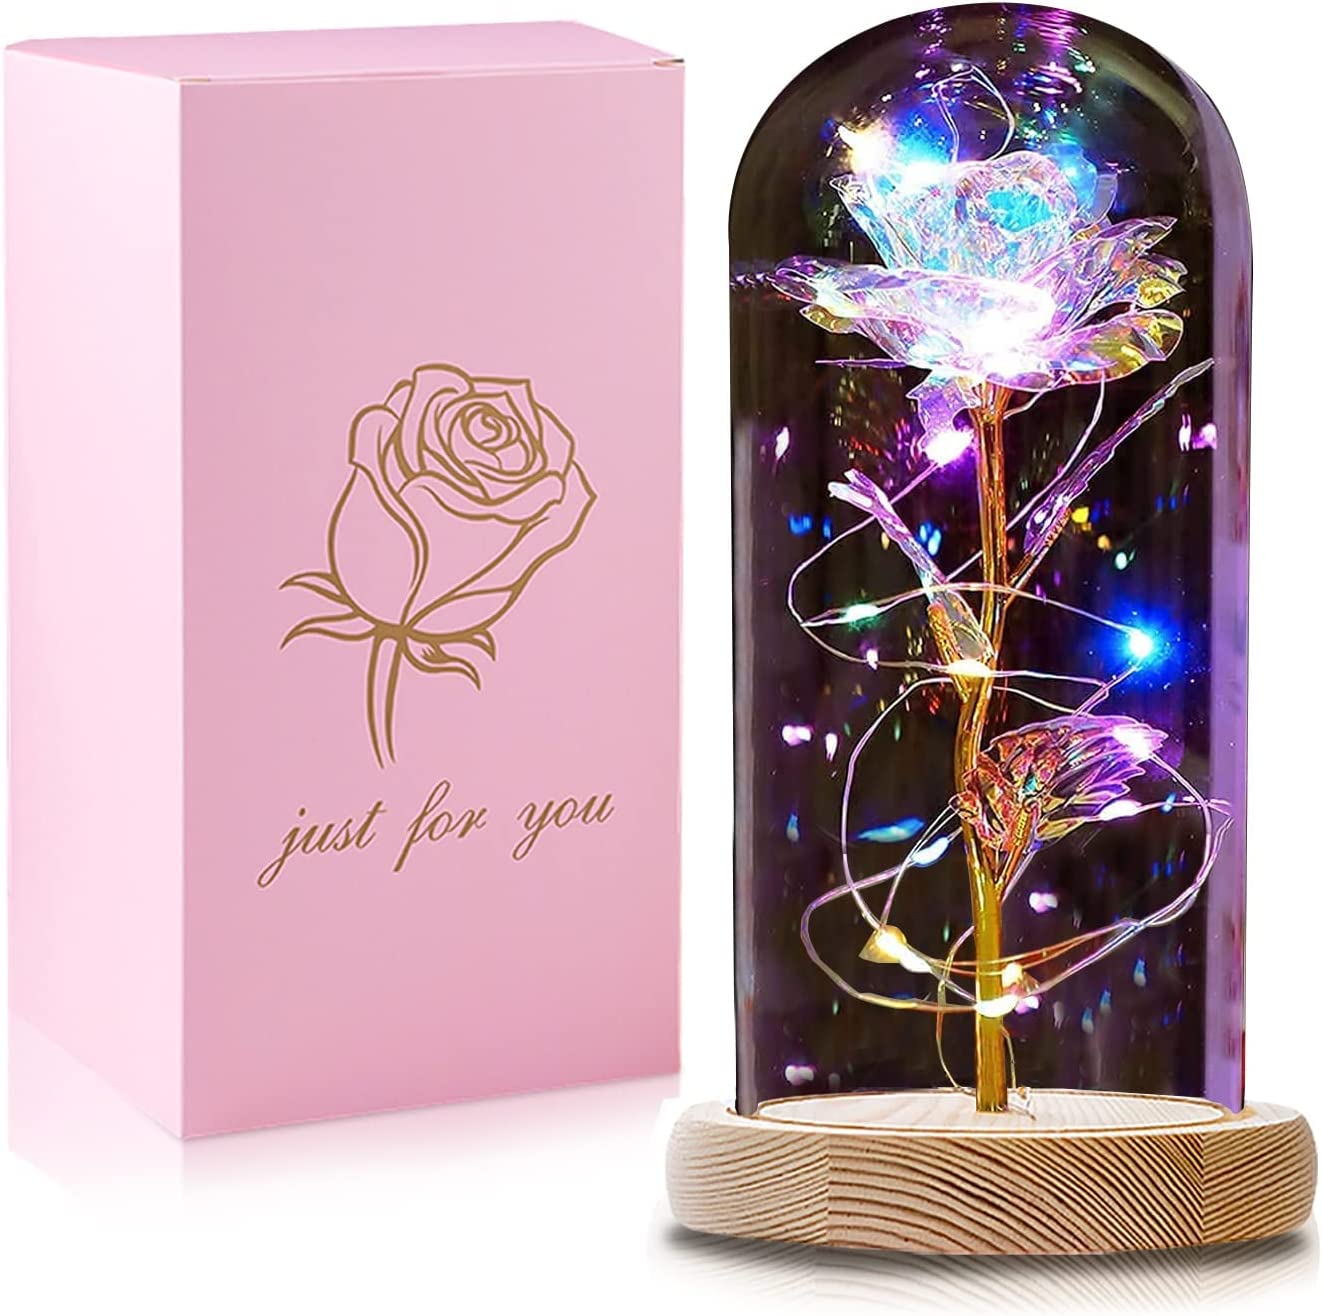 Rainbow Galaxy Glass Rose Flower in A Glass Dome 